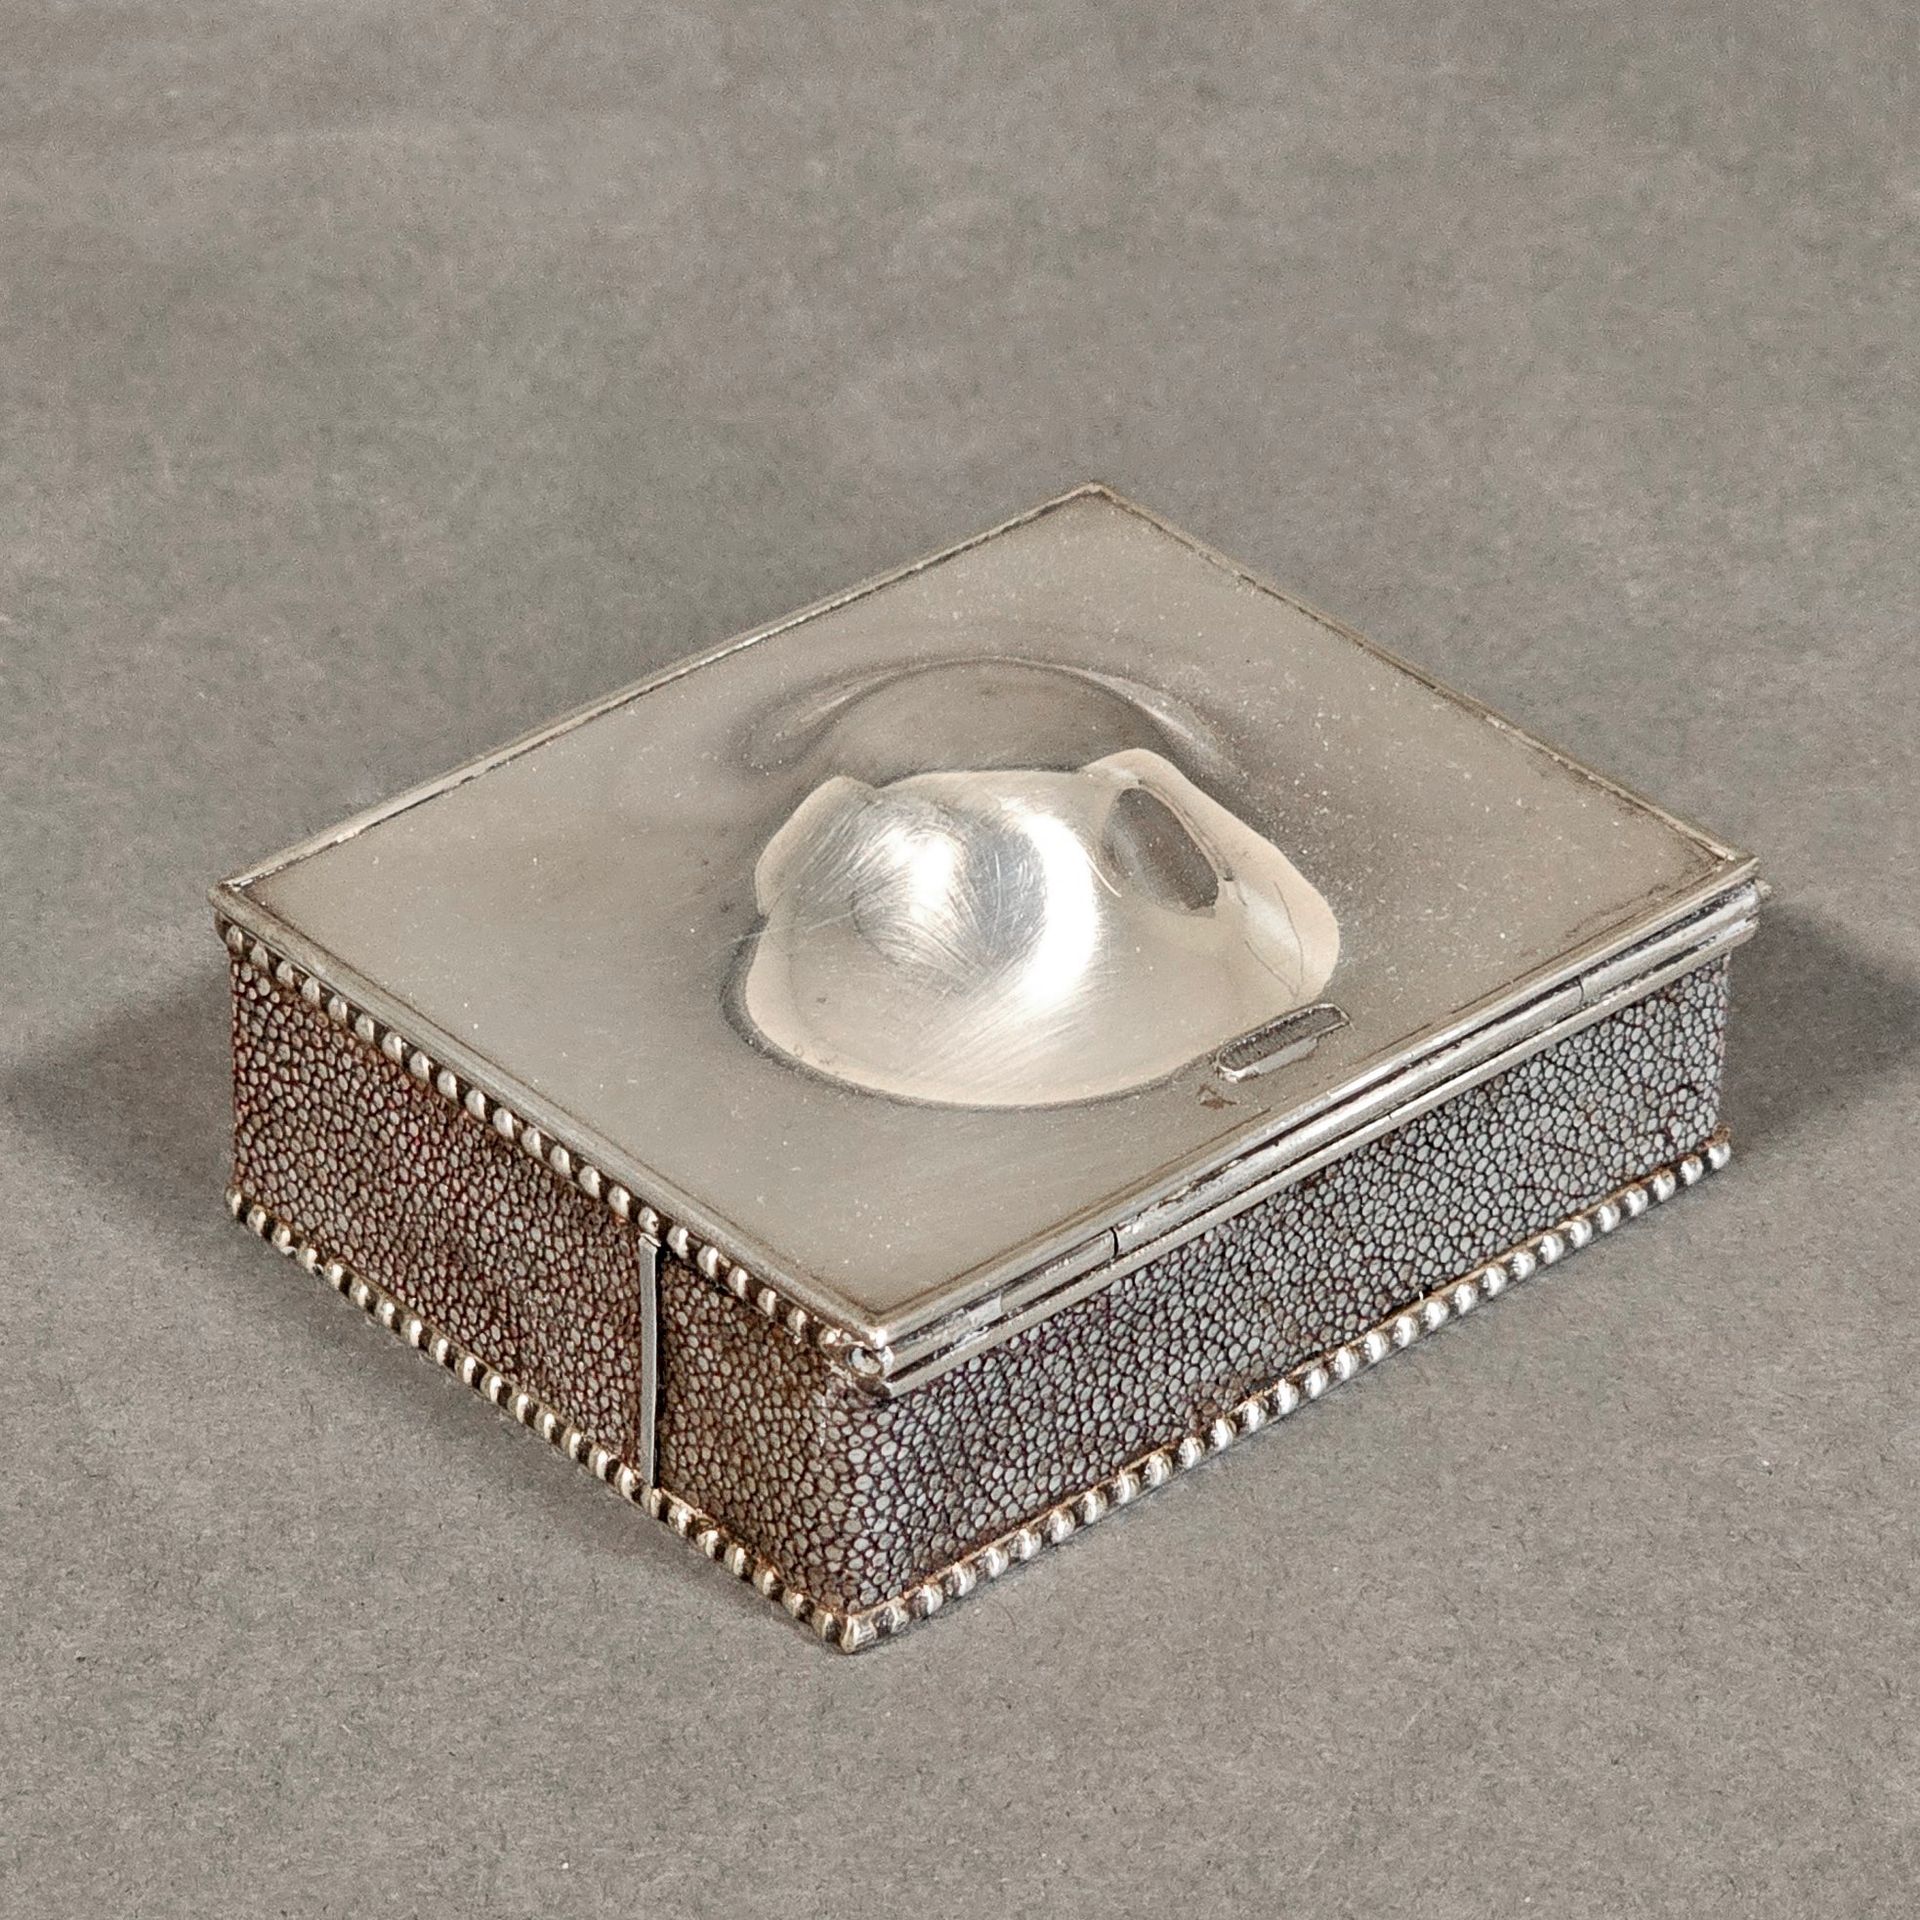 Null A silver-plated box with a domed lid, surrounded by strings of pearls and s&hellip;